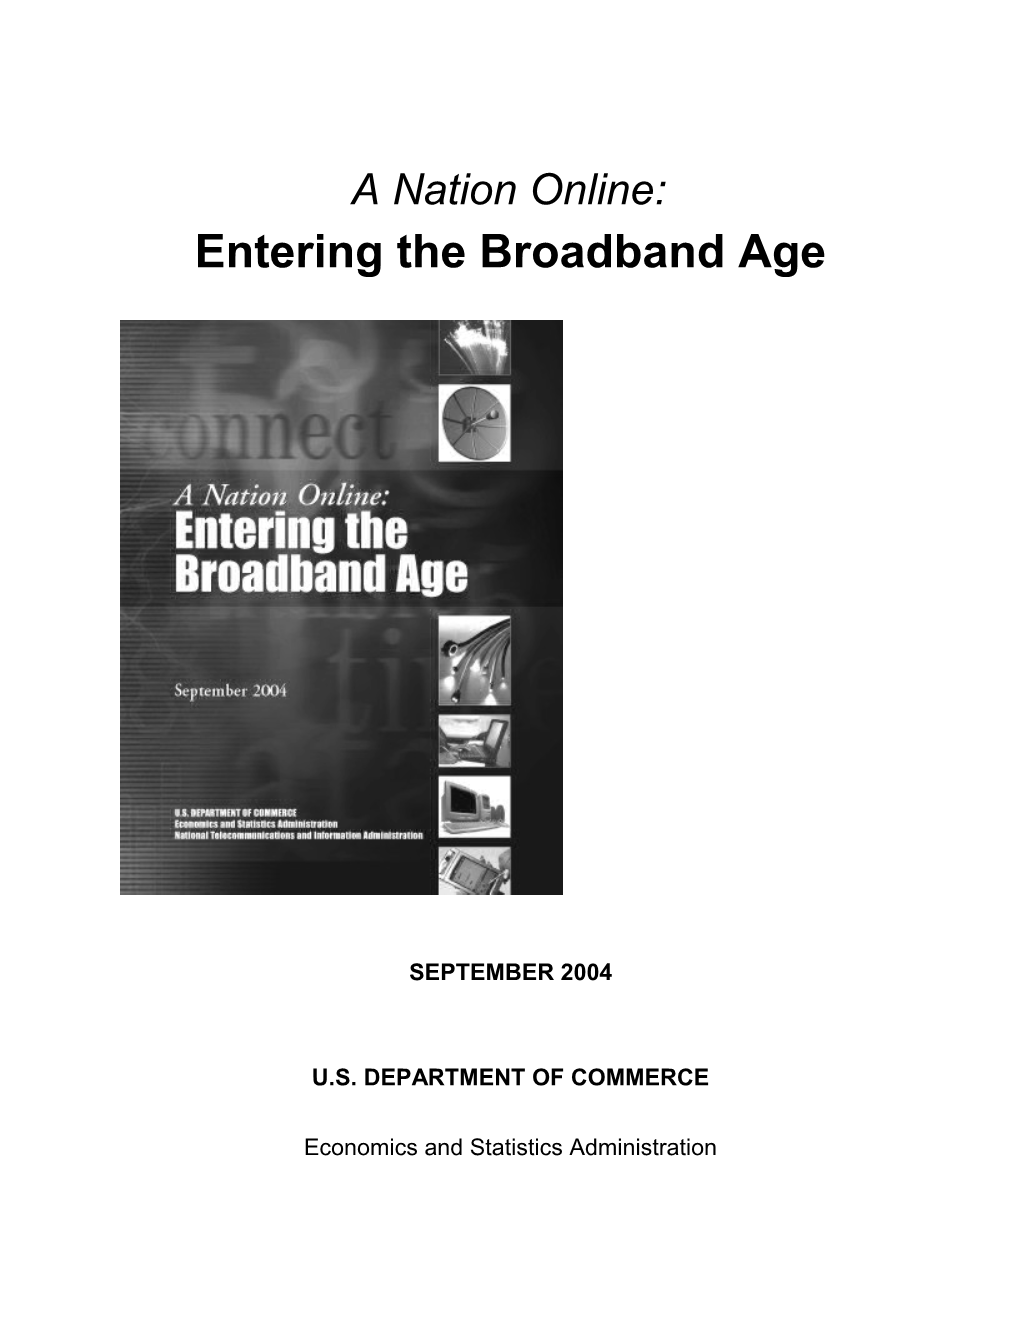 A Nation Online: Broadband Age